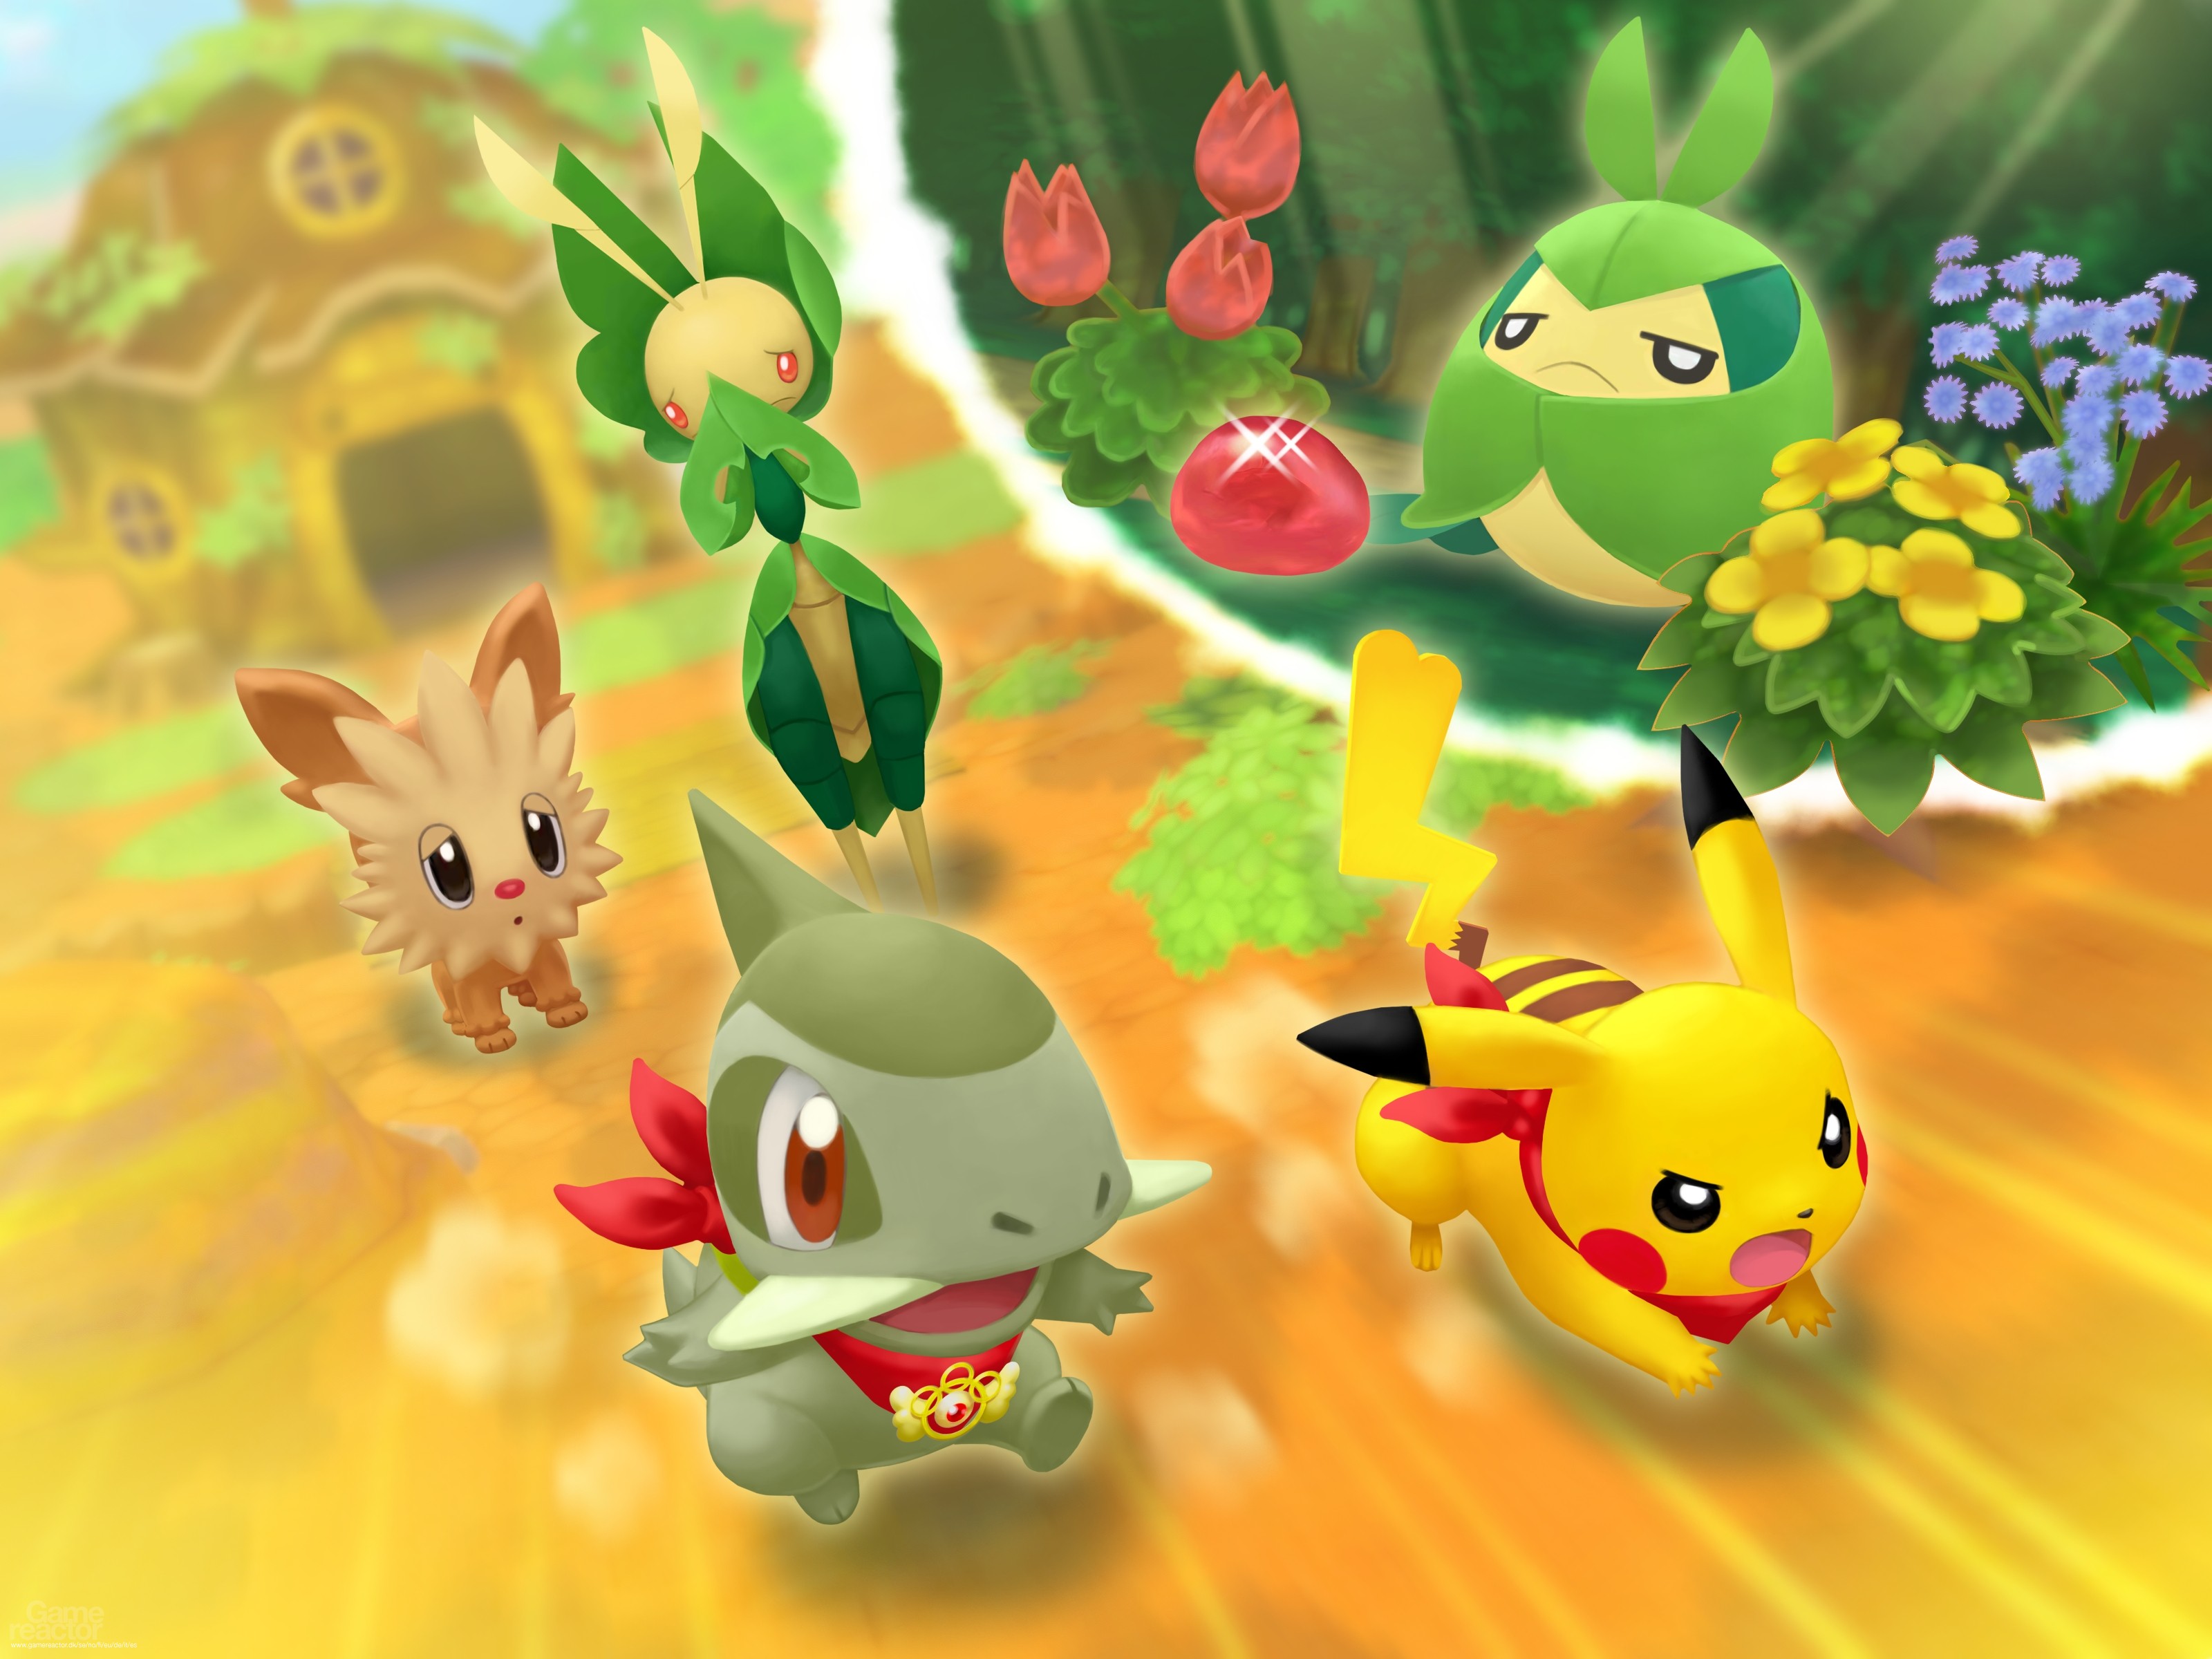 Pictures of Pokémon Mystery Dungeon: Gates to Infinity 21/51.